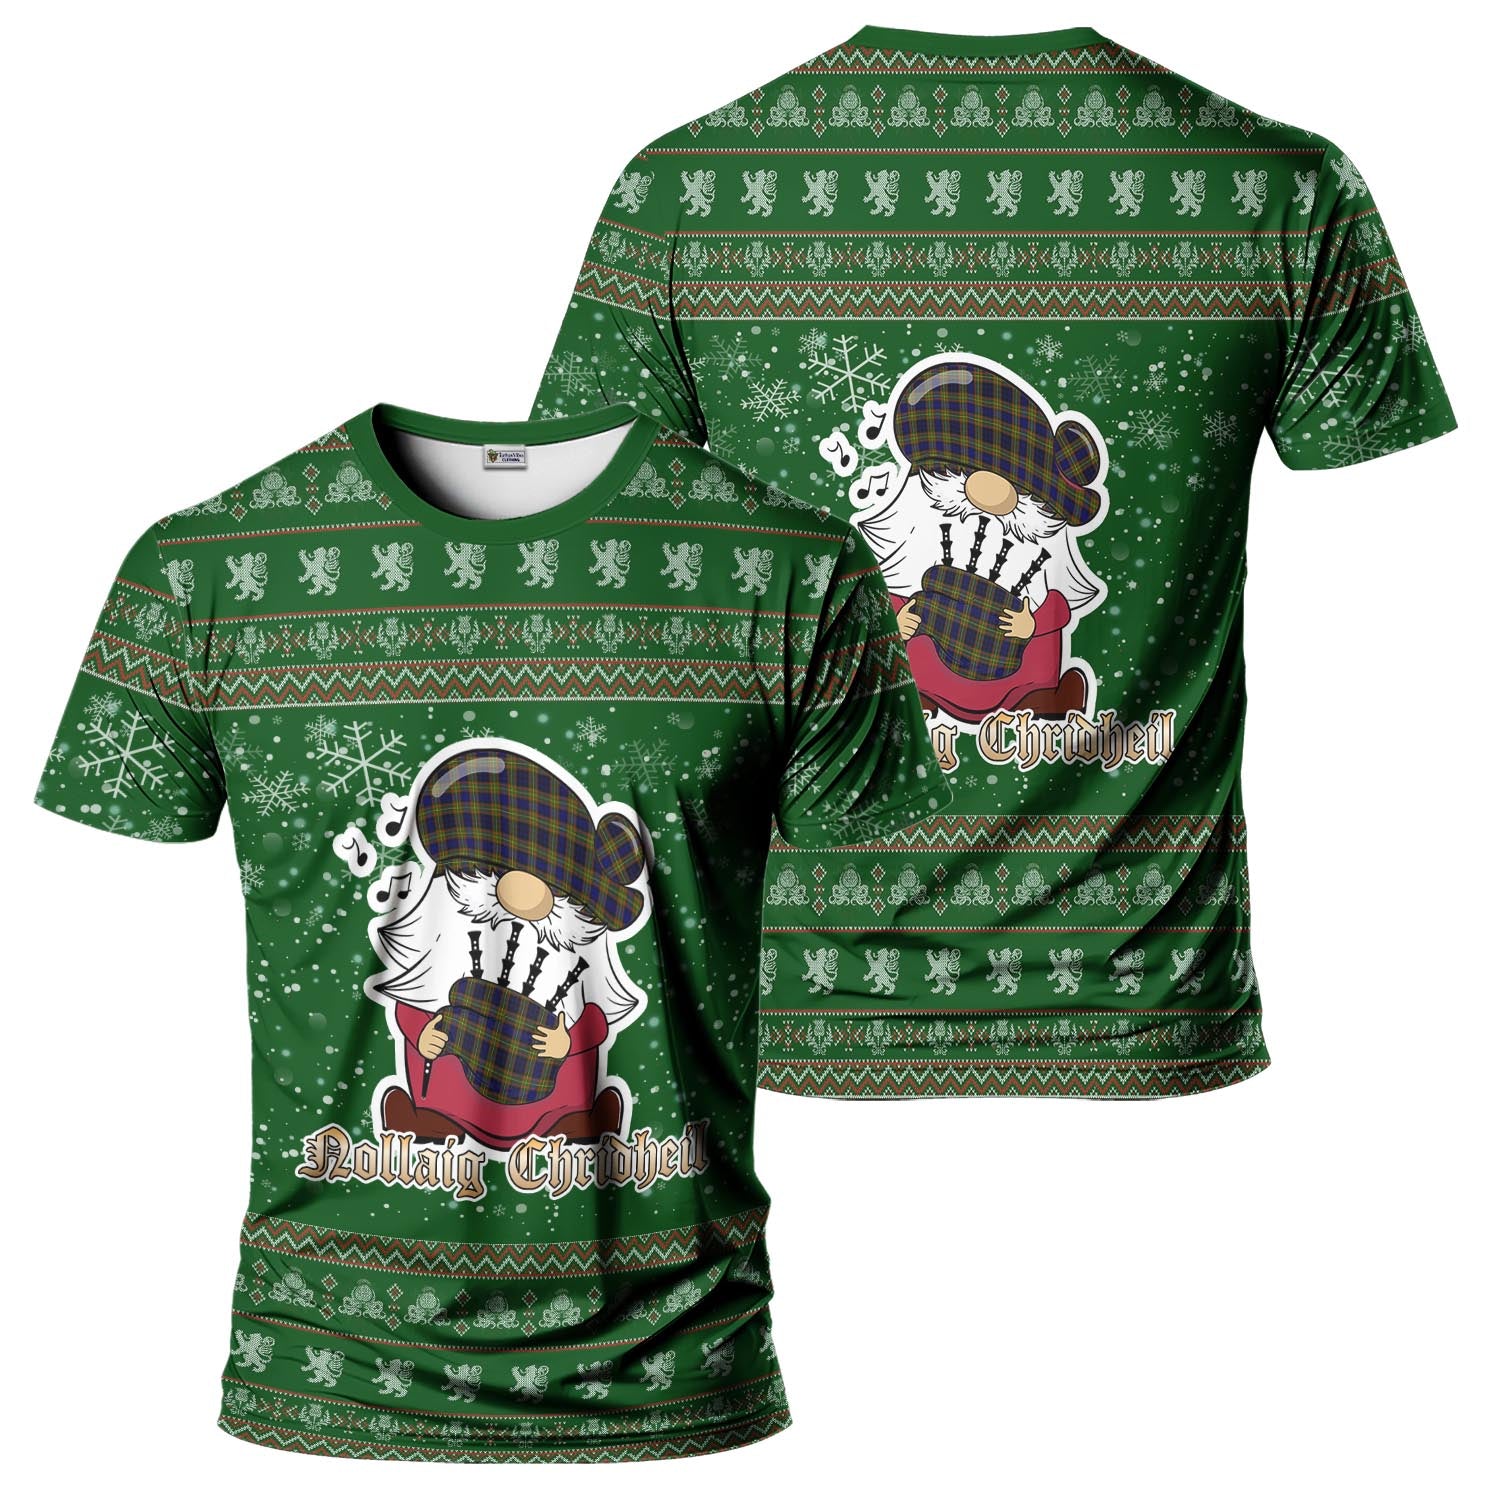 Clelland Modern Clan Christmas Family T-Shirt with Funny Gnome Playing Bagpipes Men's Shirt Green - Tartanvibesclothing